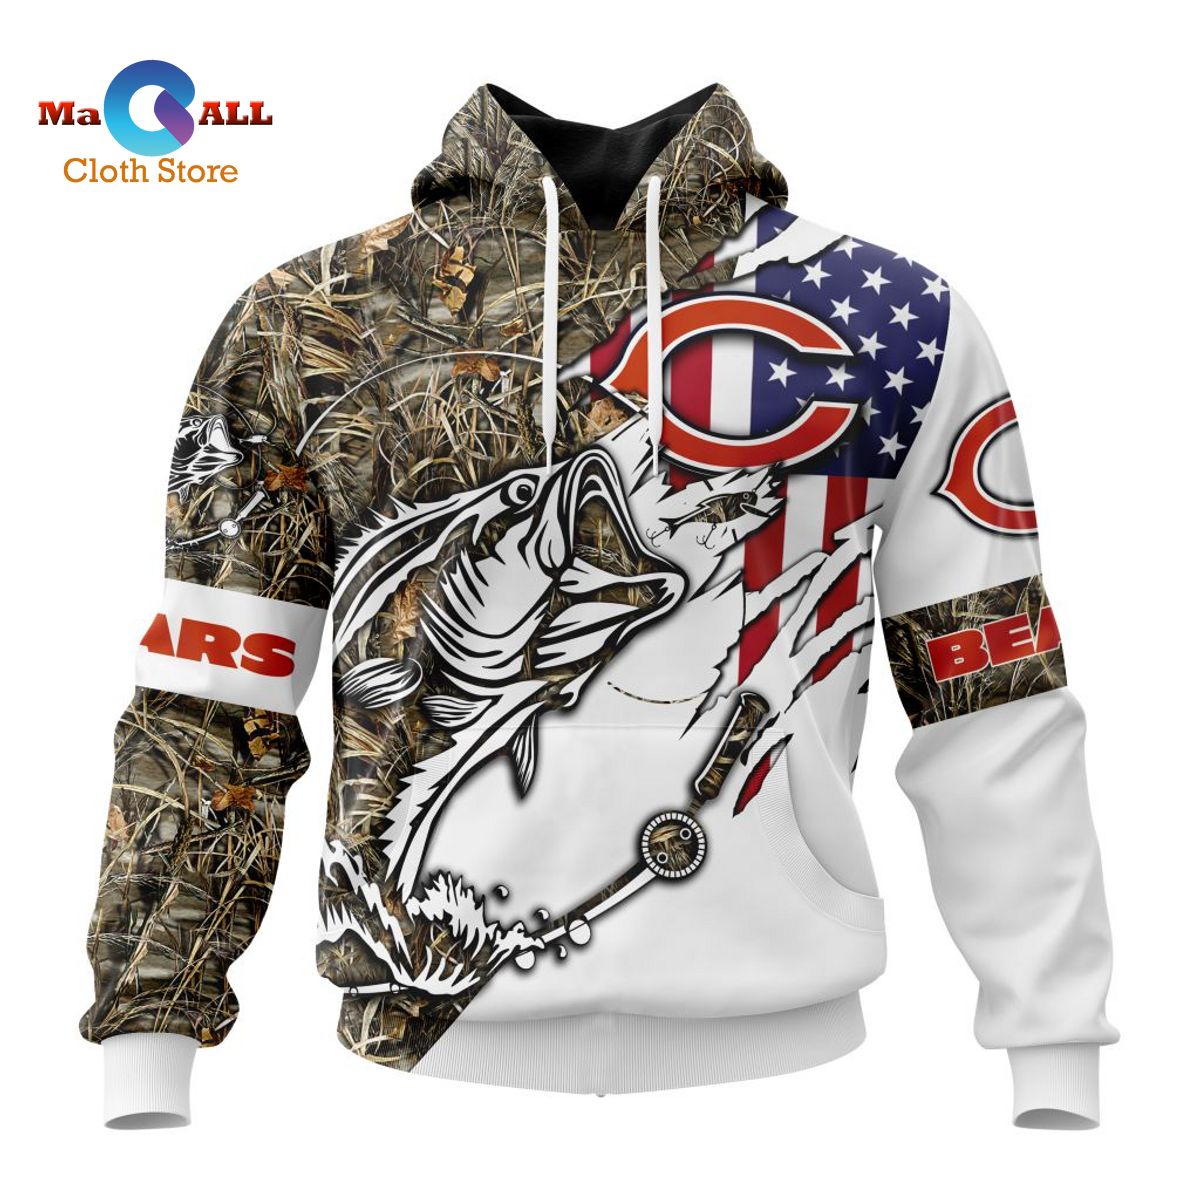 https://images.macallcloth.com/wp-content/uploads/2022/09/20180601/hot-nfl-chicago-bears-special-fishing-with-flag-of-the-united-states-st2201-1-gYtwI.jpg